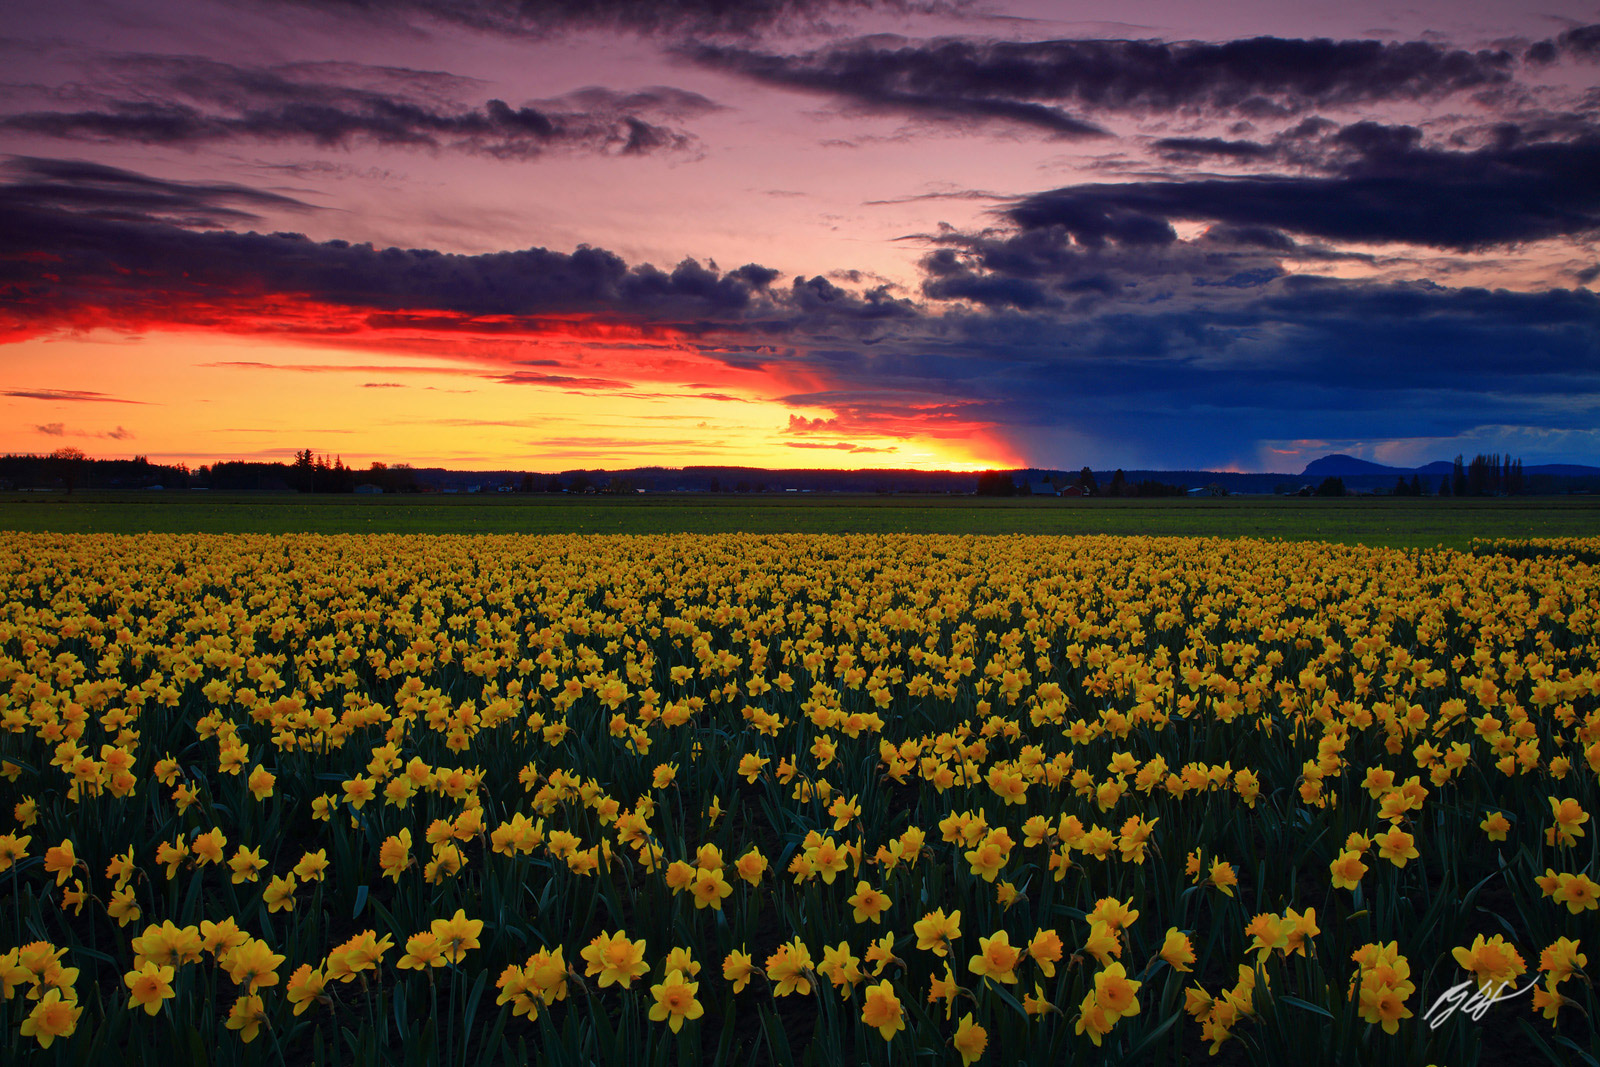 Sunset Ends the Day over the Roozengaarde Daffodil Fields in Skagit Valley in Washington